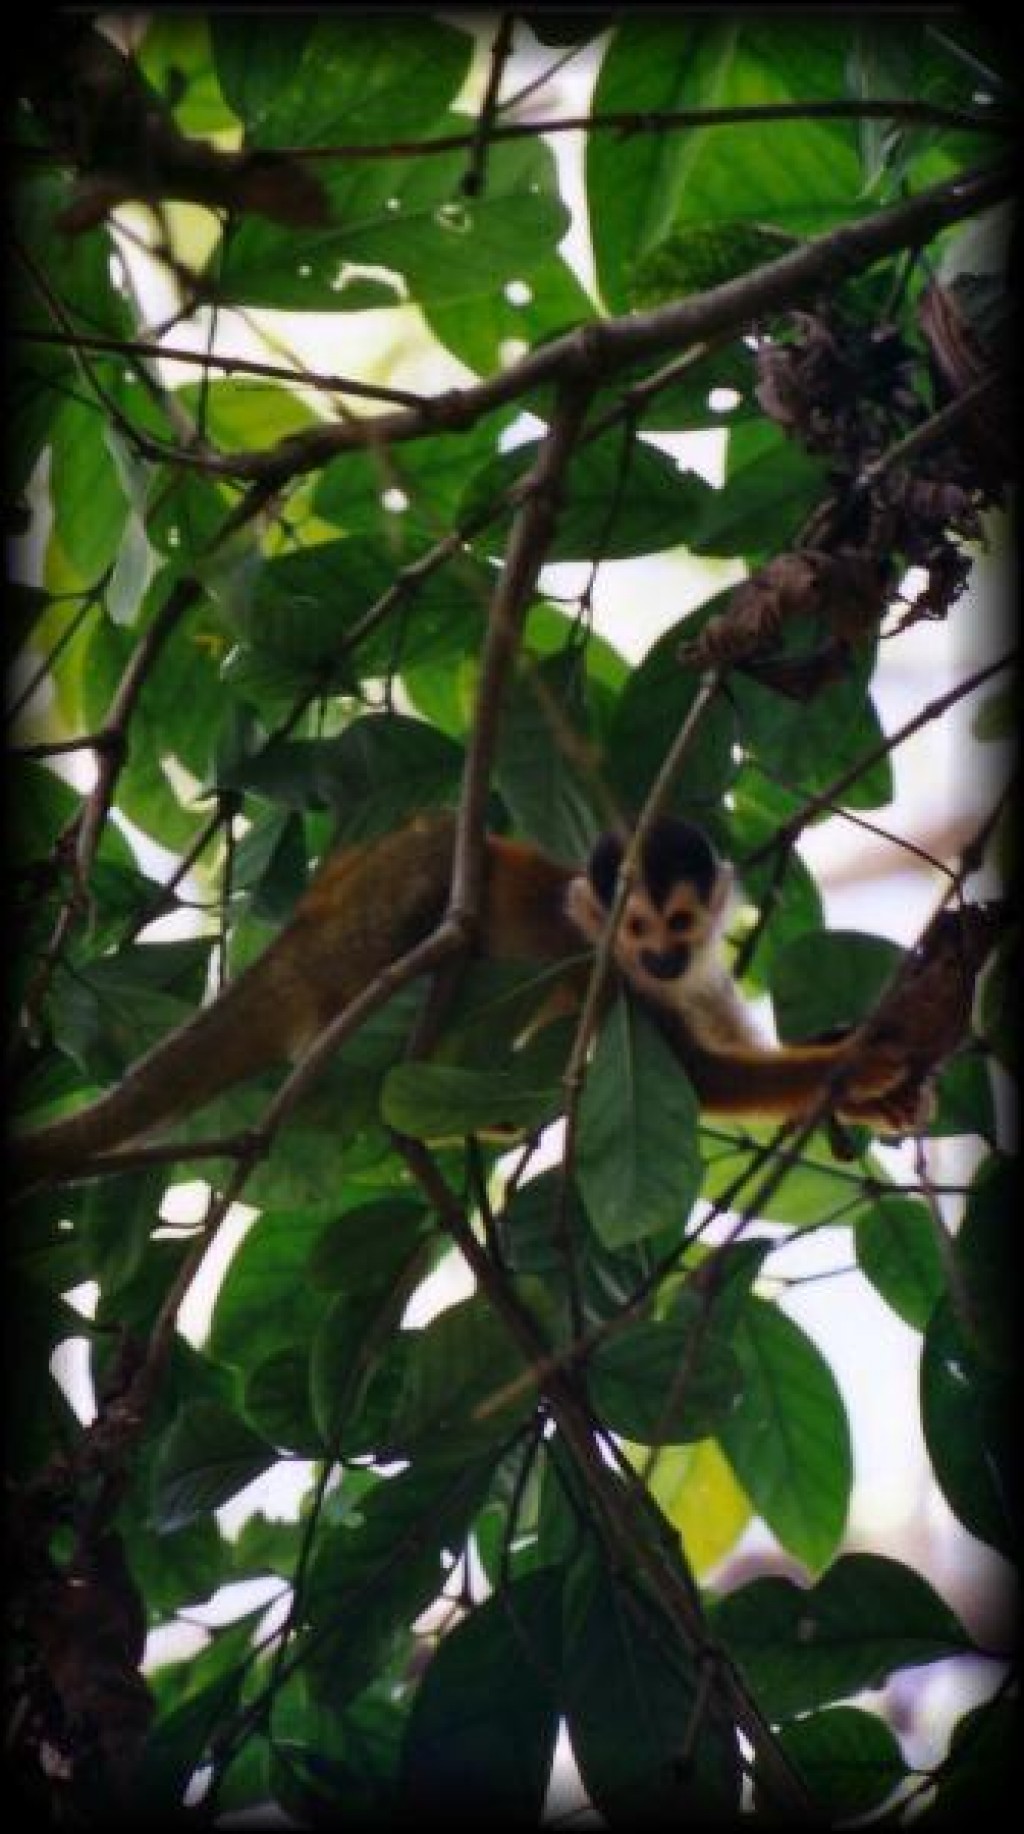 During this hike we spotted every species of monkey that is found in Costa Rica.